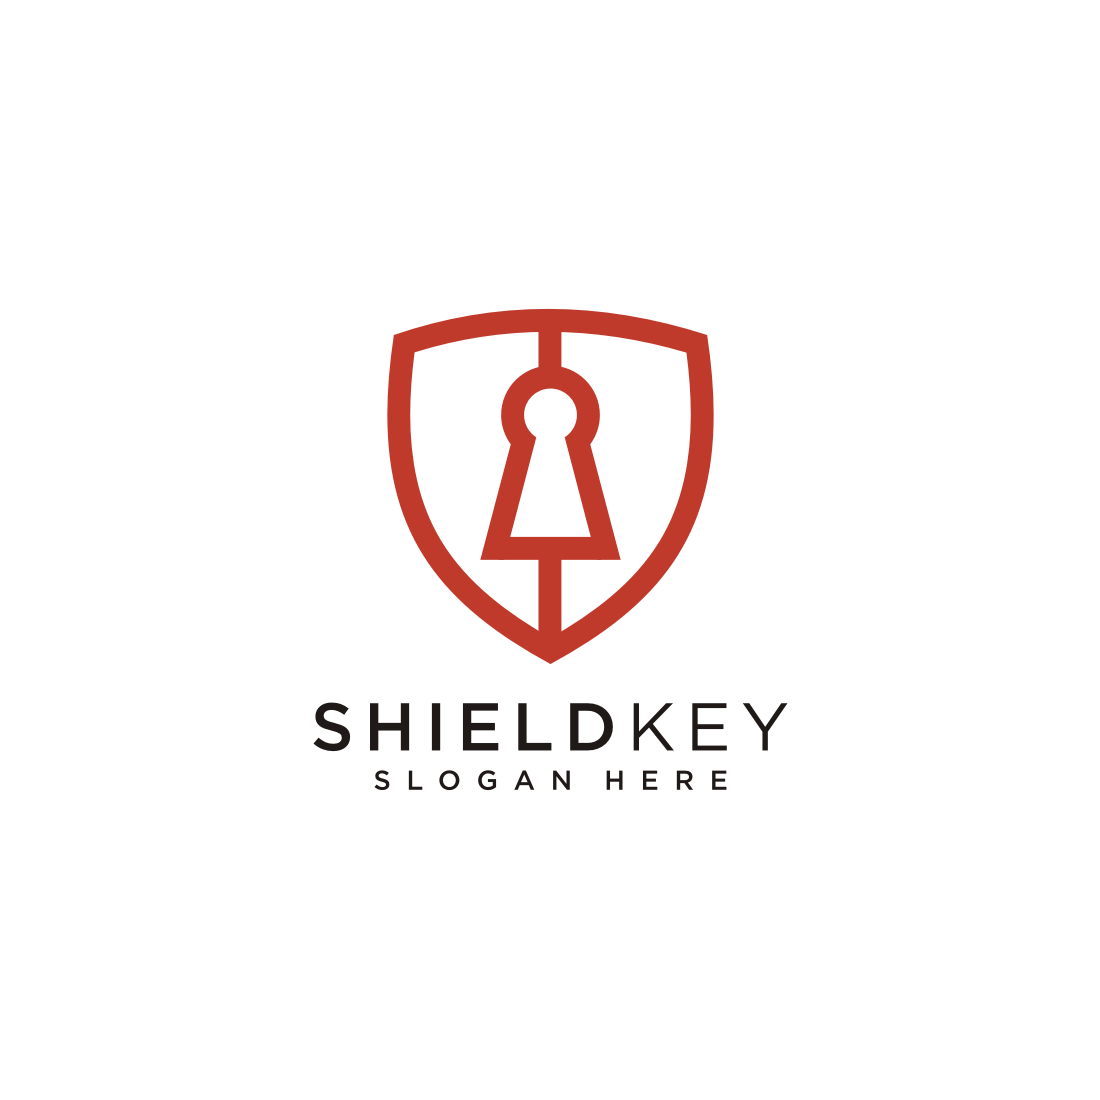 red shield with key logo vector cover image.